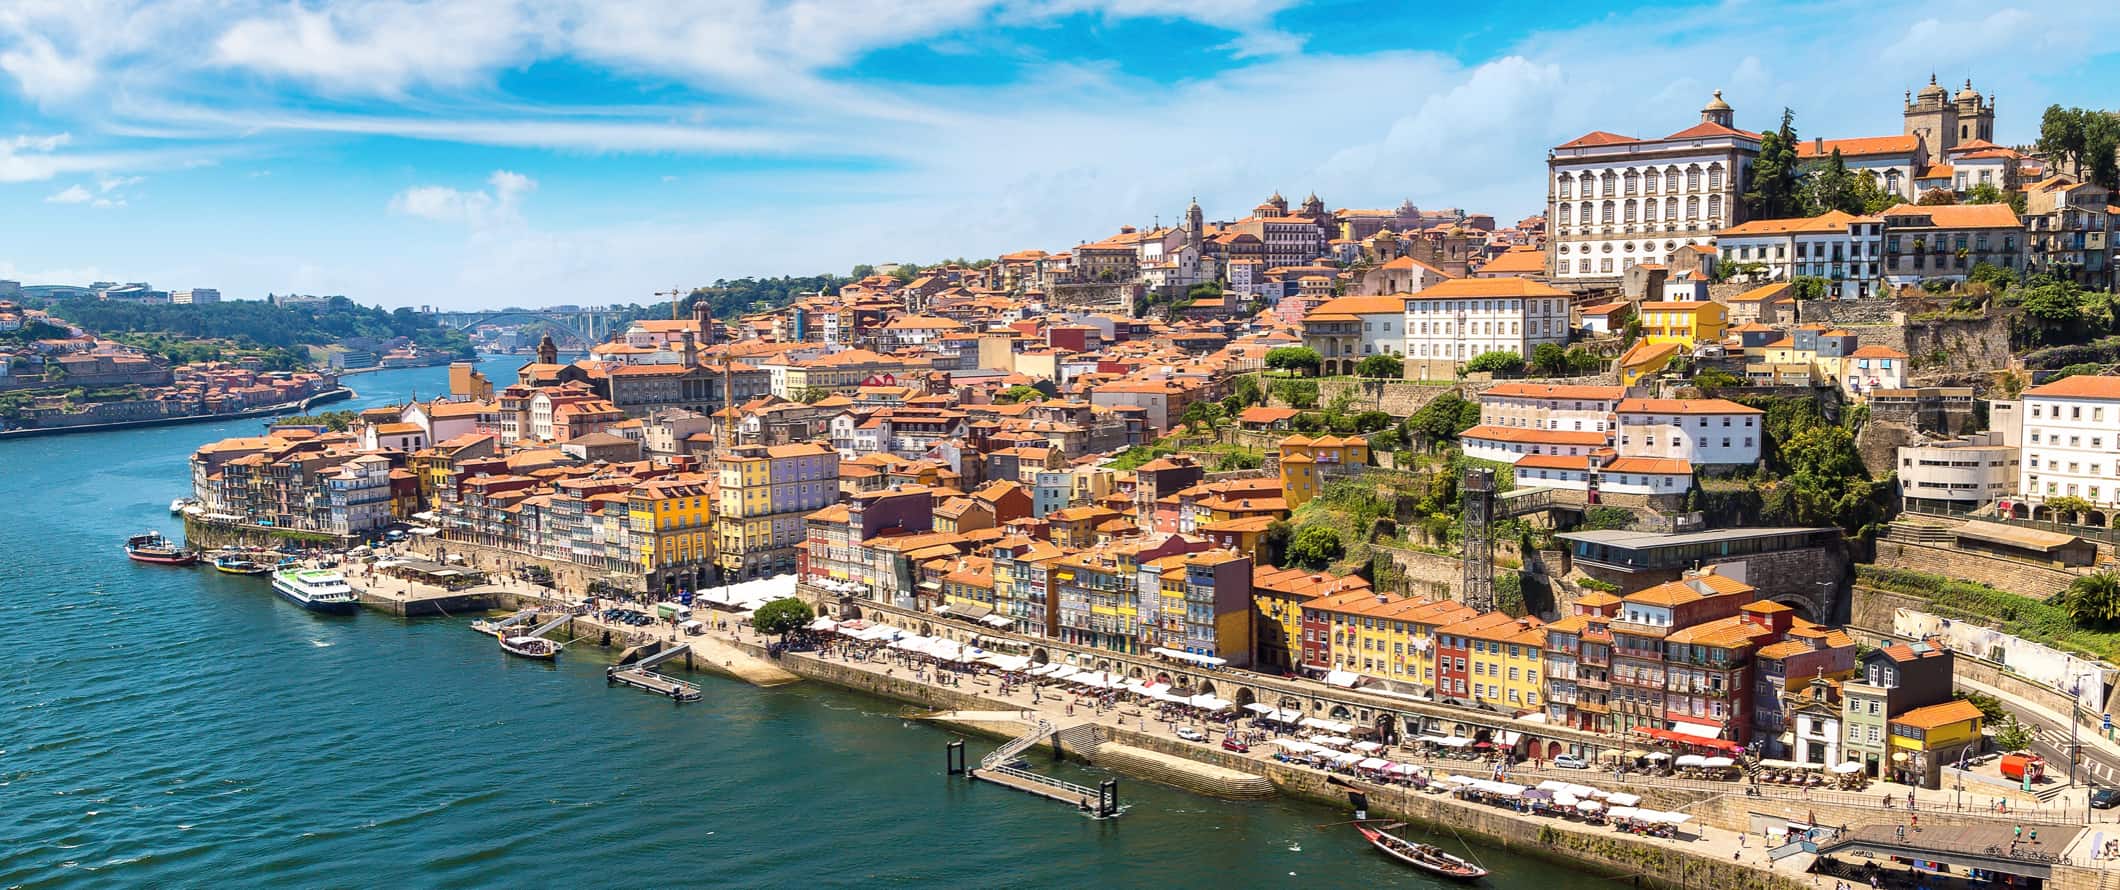 Porto, Portugal and its hillside colorful buildings as seen from the Douro River